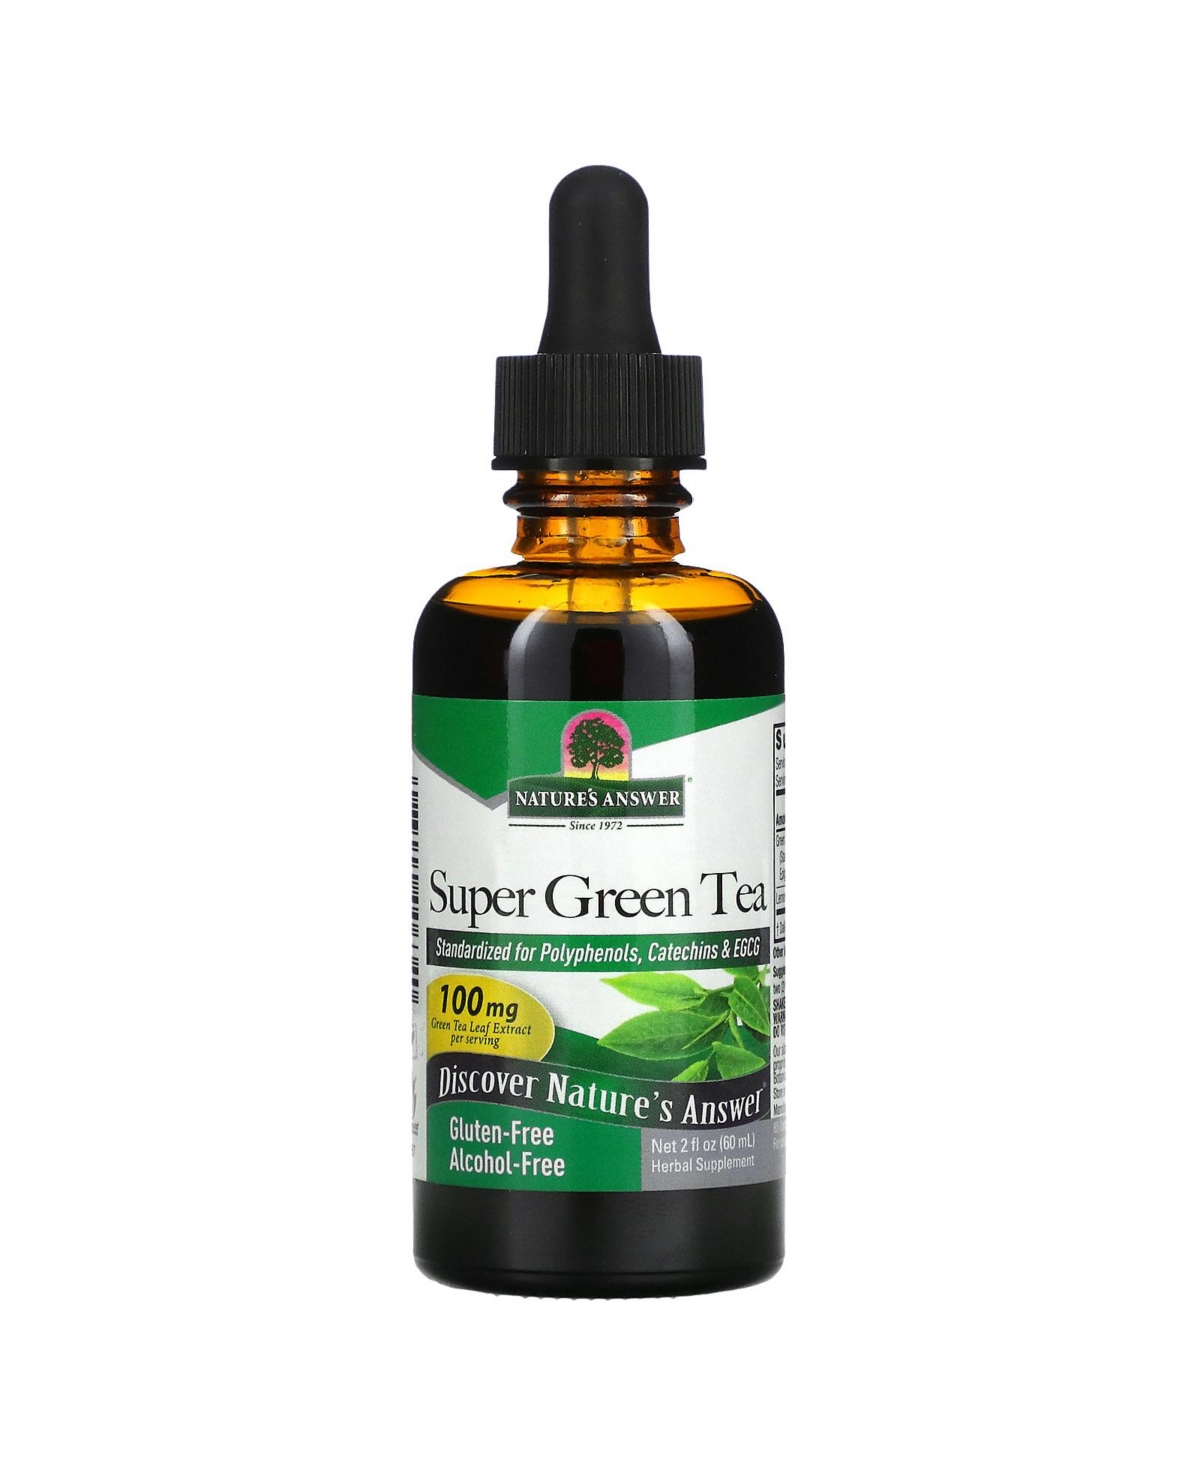 Super Green Tea, Alcohol-Free, 2 fl oz (60 ml), Nature's Answer - Assorted Pre-Pack